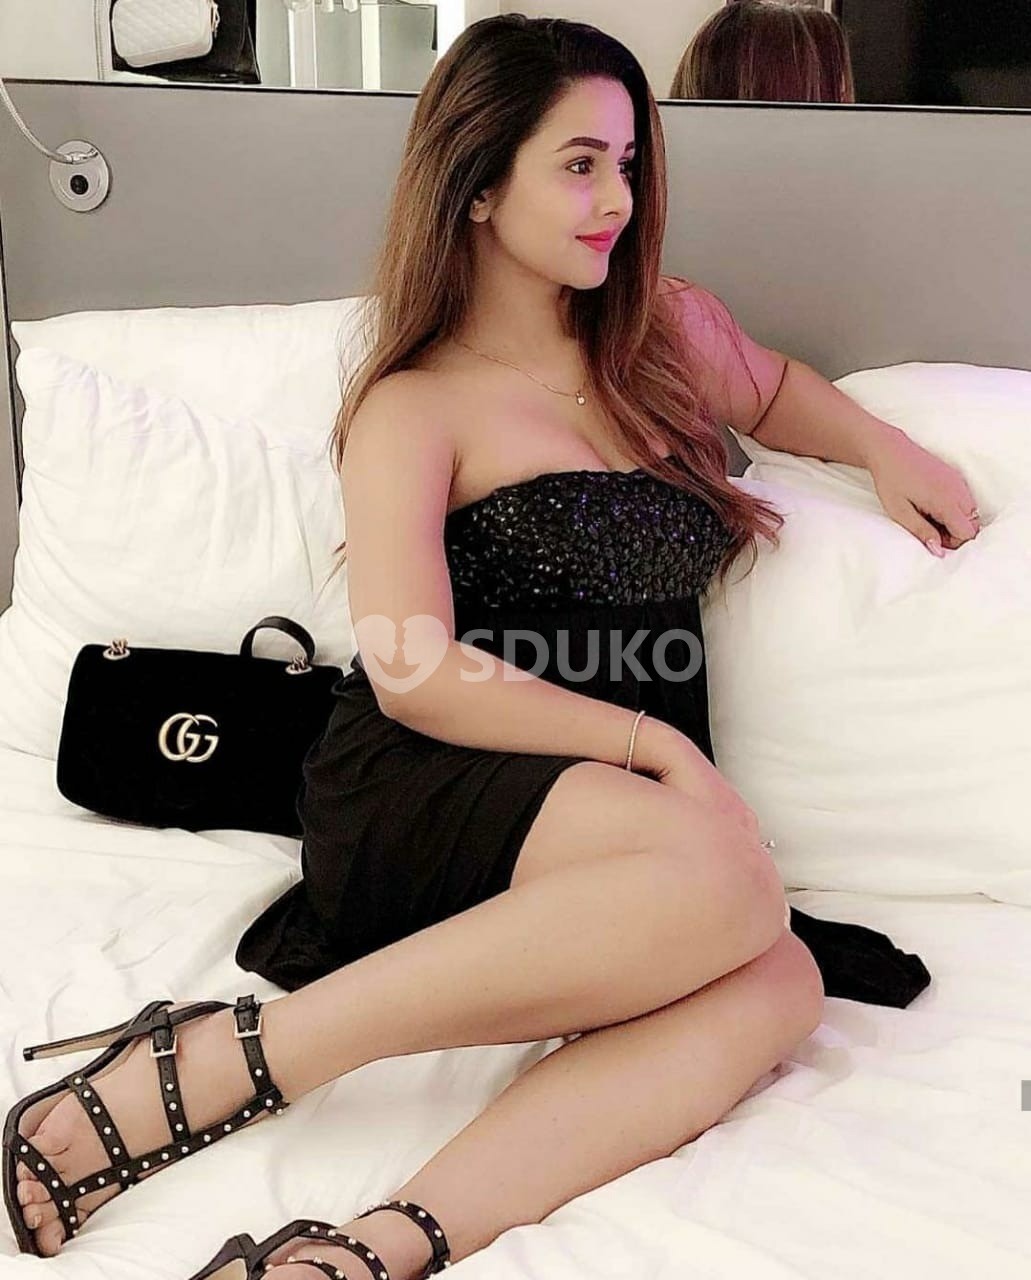 Hyderabad 👉 Low price 100%;:..::..: genuine👥sexy VIP call girls are provided👌safe and secure service .call 📞